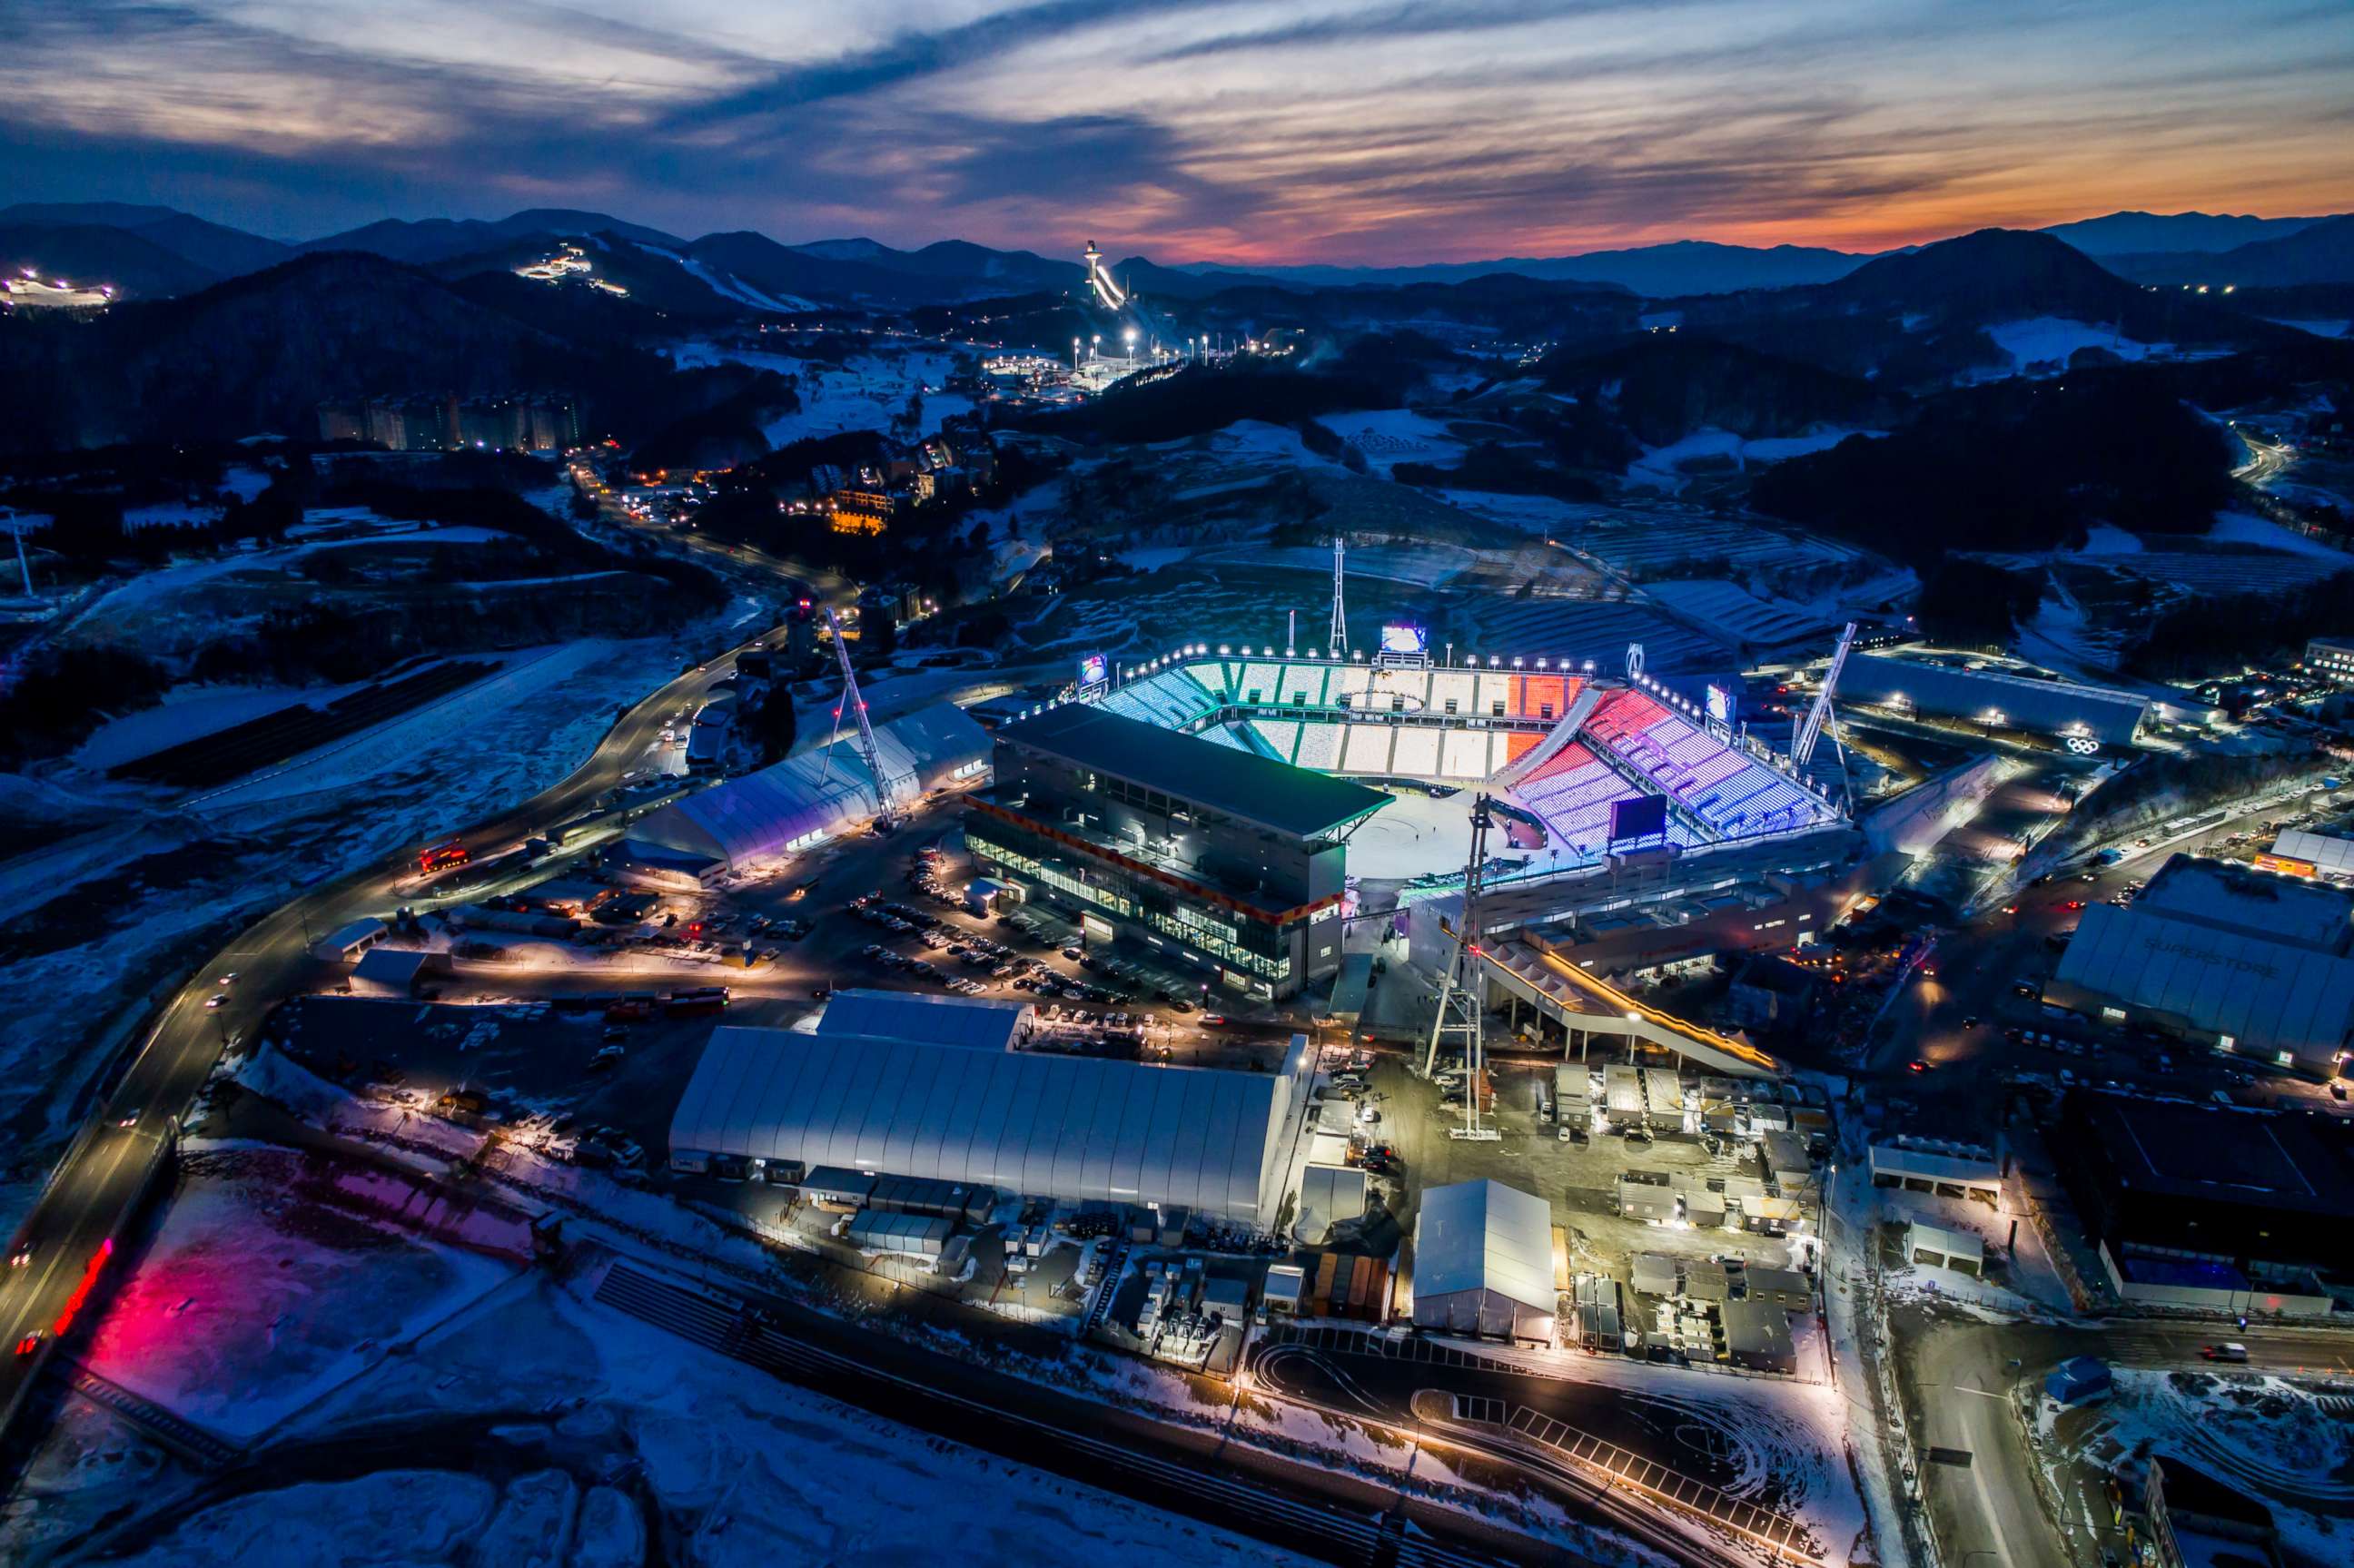 PHOTO: The Pyeongchang Olympic Stadium, the venue for the opening and closing ceremonies at the 2018 Pyeongchang Winter Olympic Games, stands at dawn in this aerial photograph taken above Pyeongchang, Gangwon, South Korea, Jan. 25, 2018.